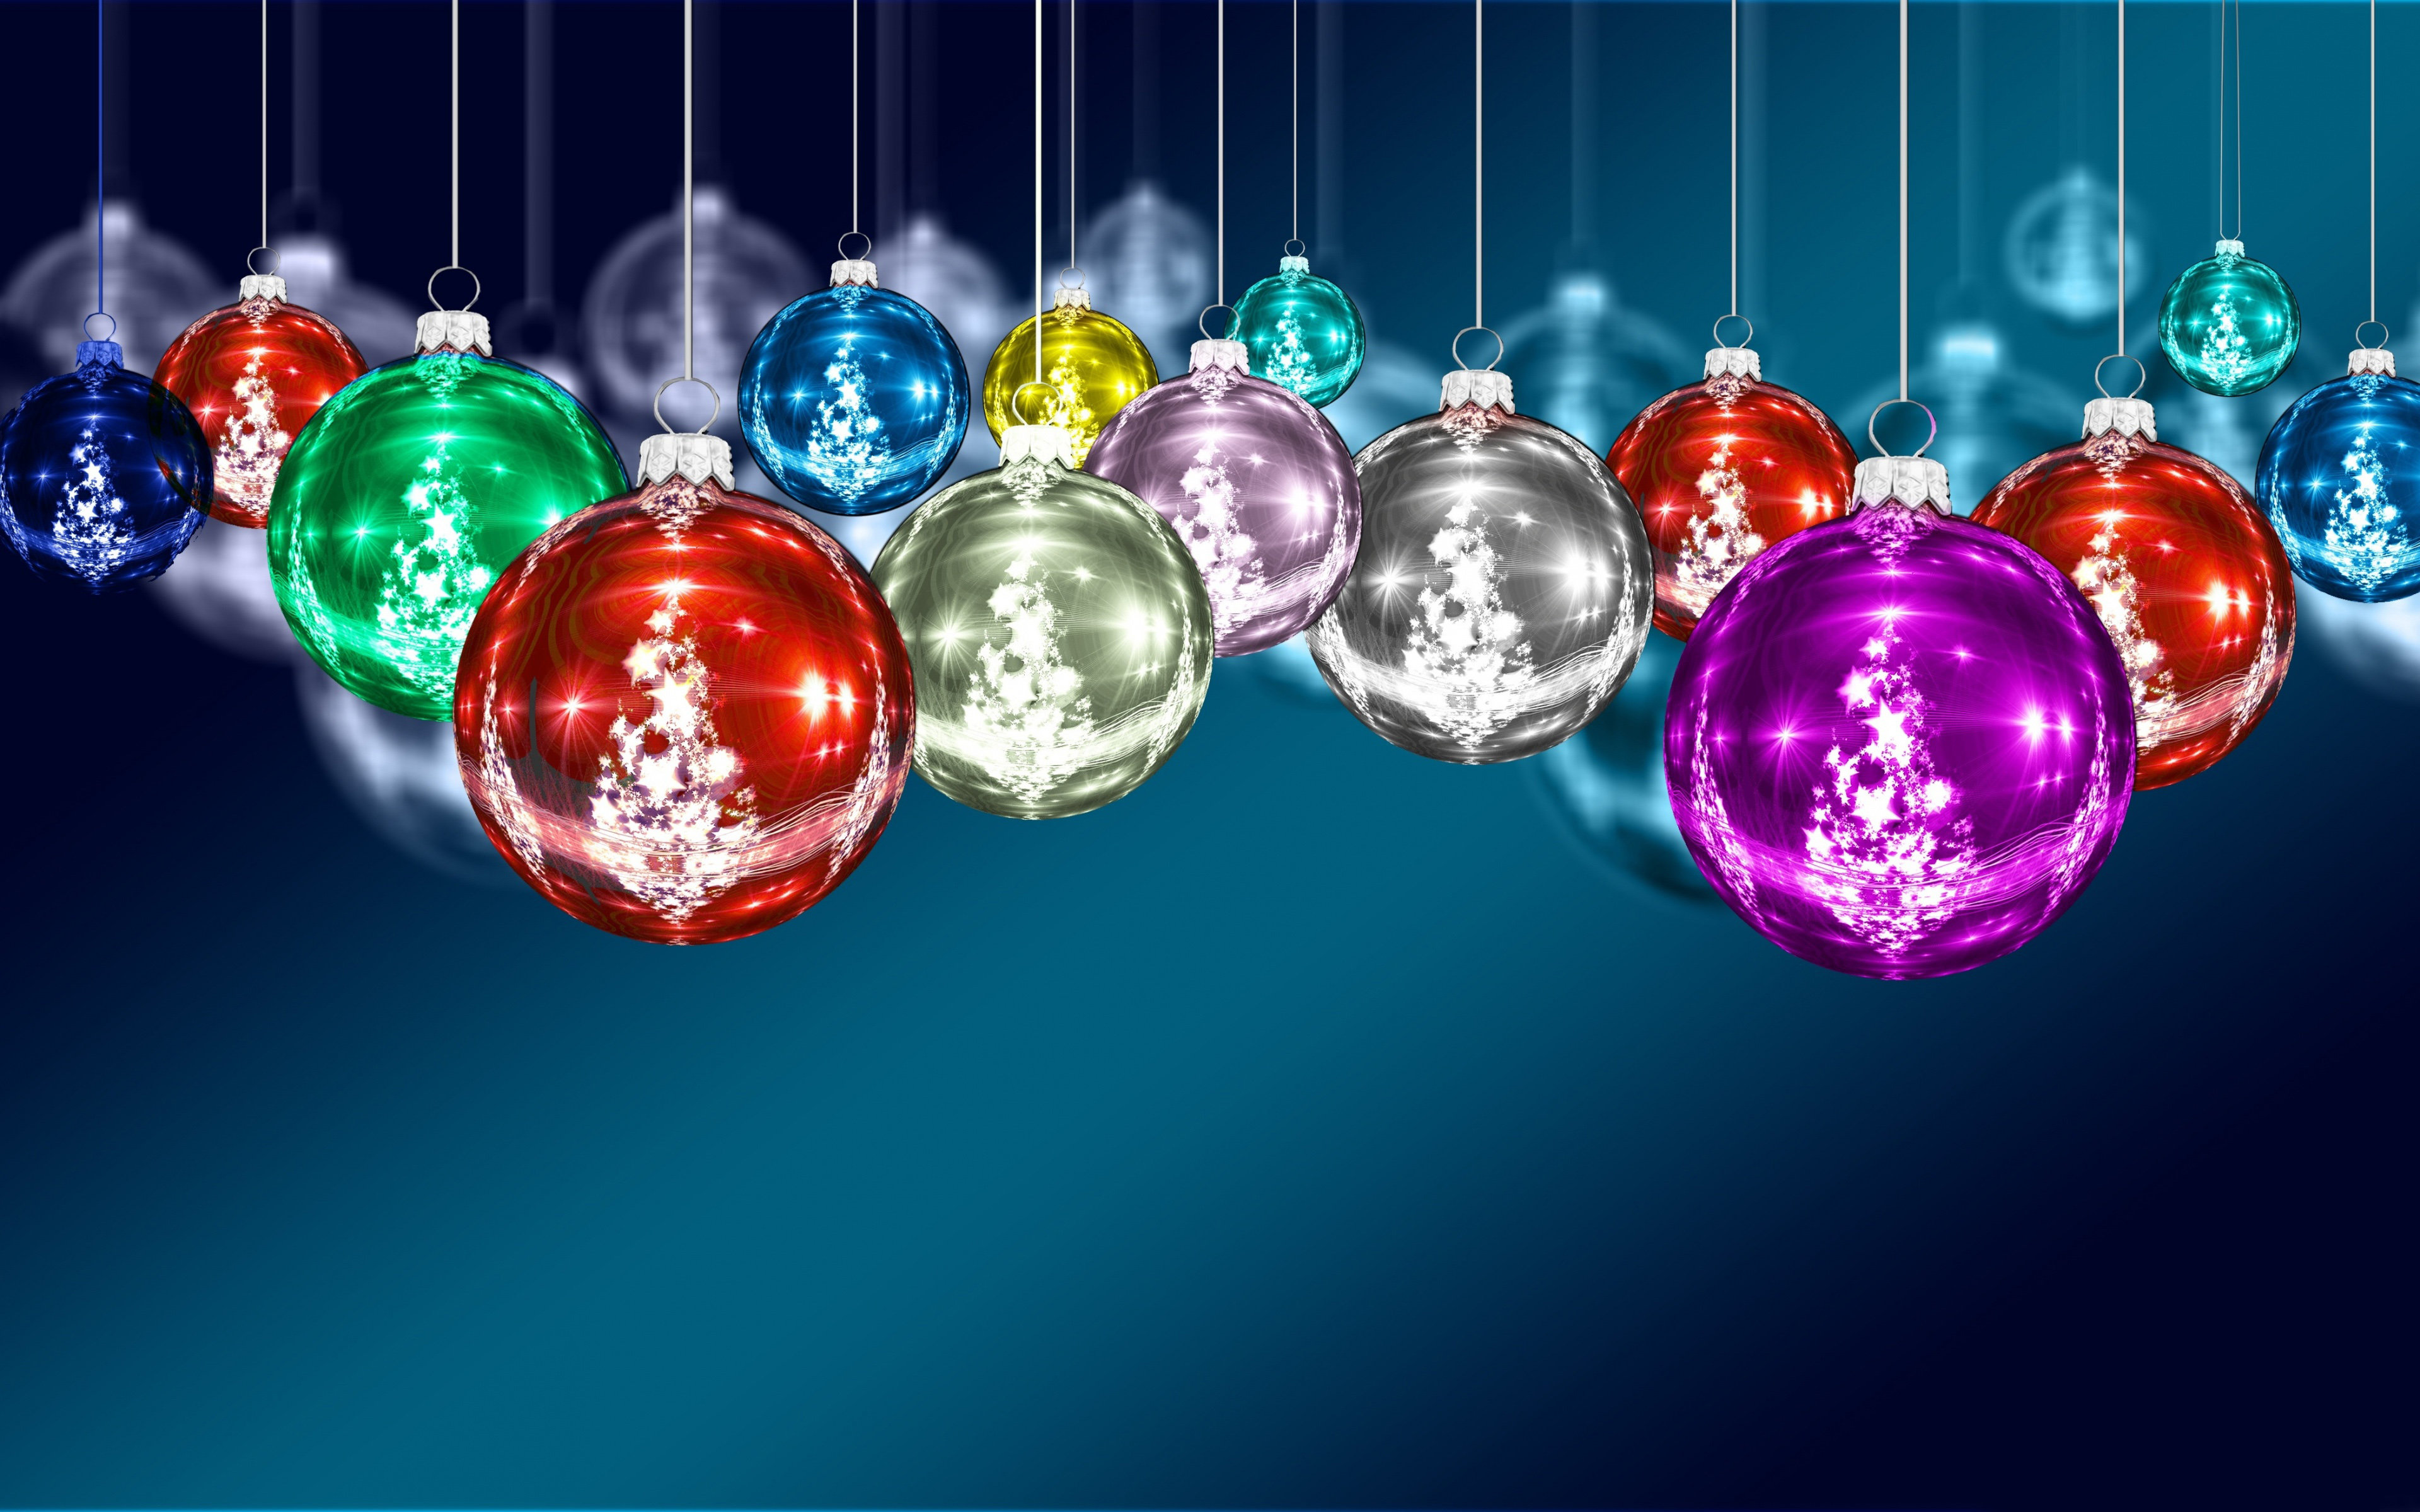 Awesome Christmas Ornaments/Decorations free background ID:433777 for hd 3840x2400 desktop